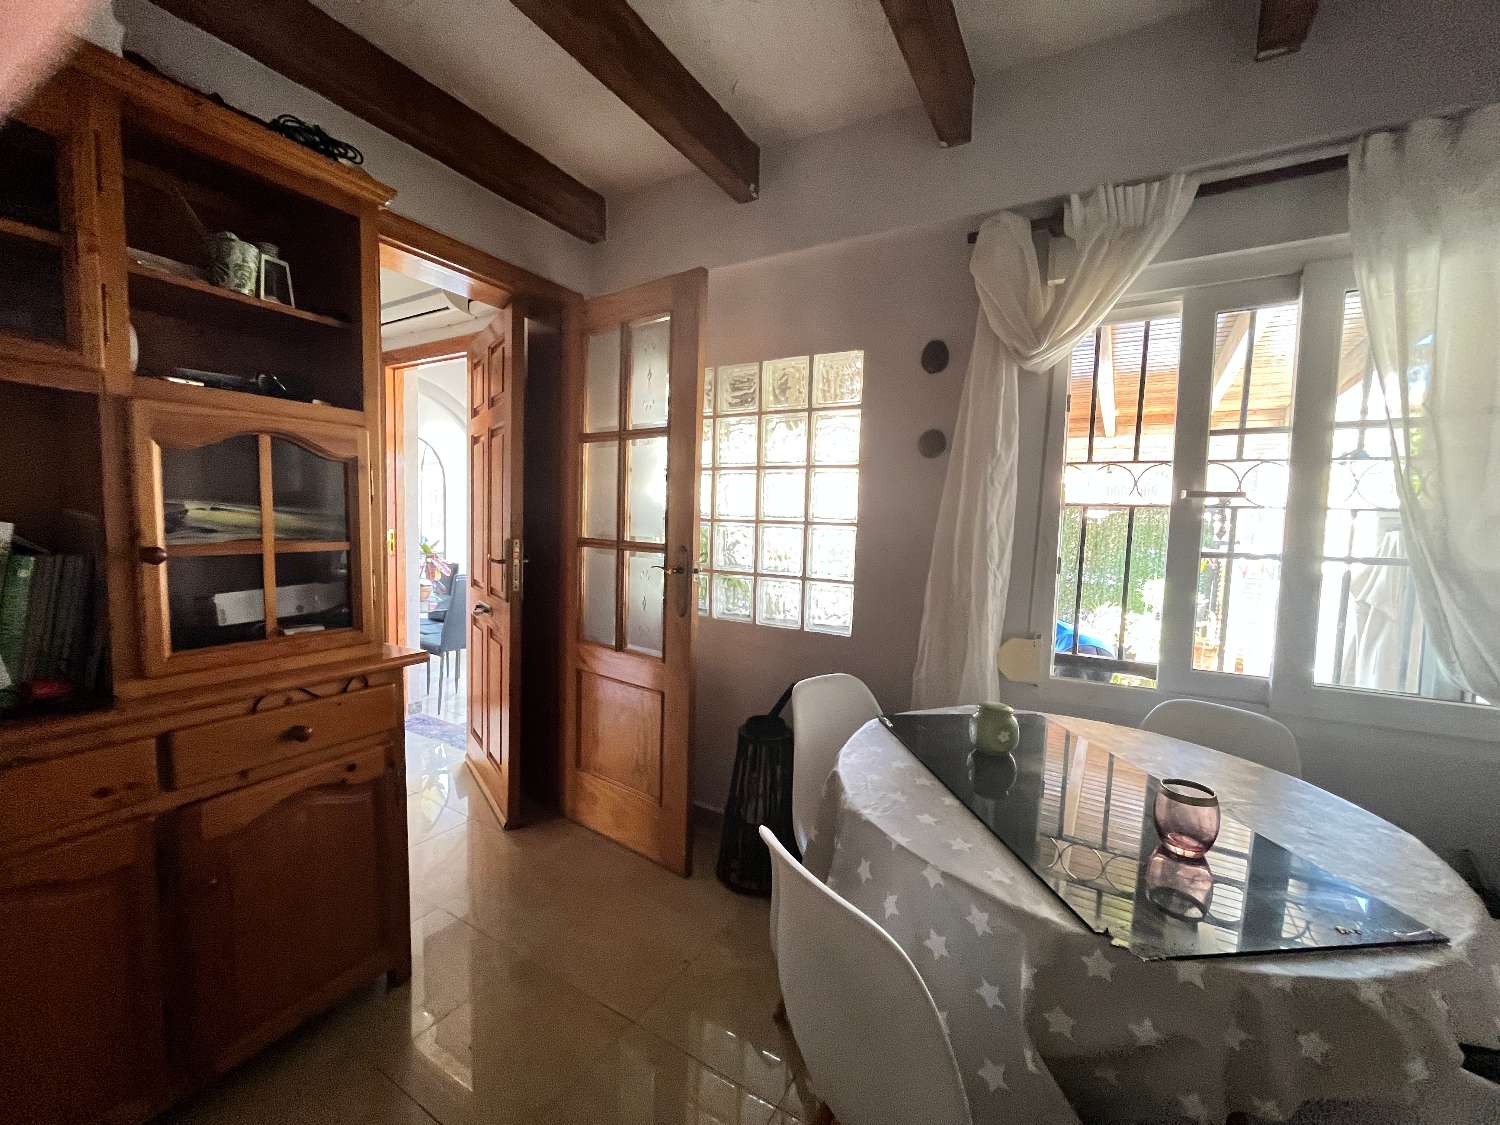 Great duplex with 3 bedrooms, 2 bathrooms located in the center of Playa Flamenca